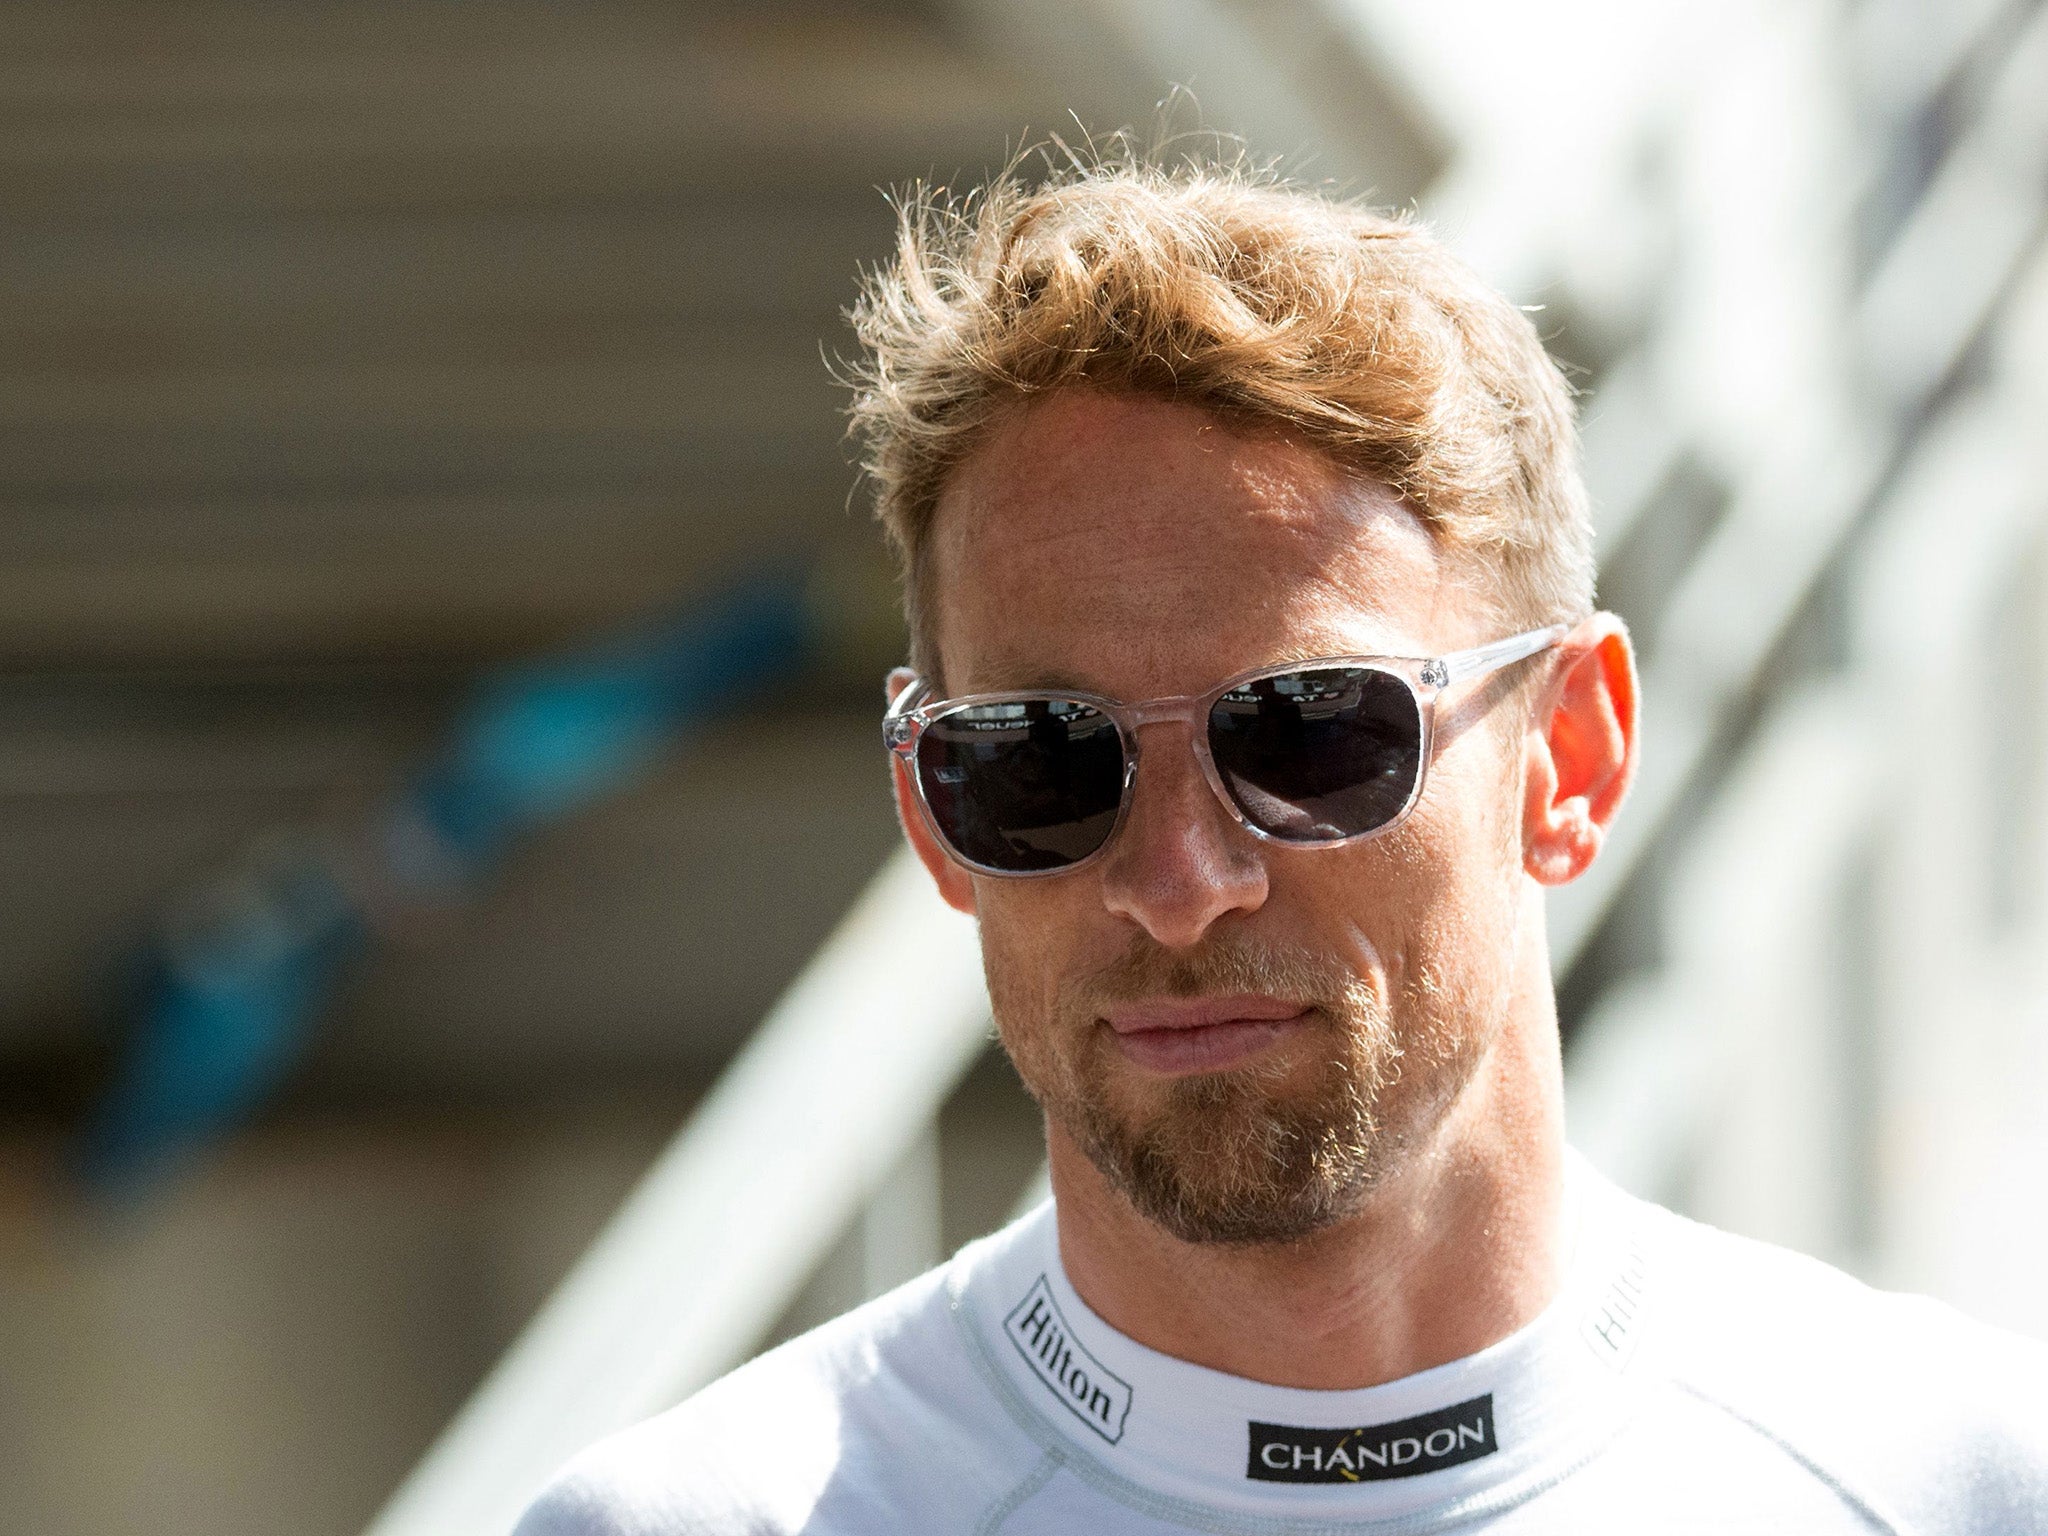 Button will start at the back of the grid